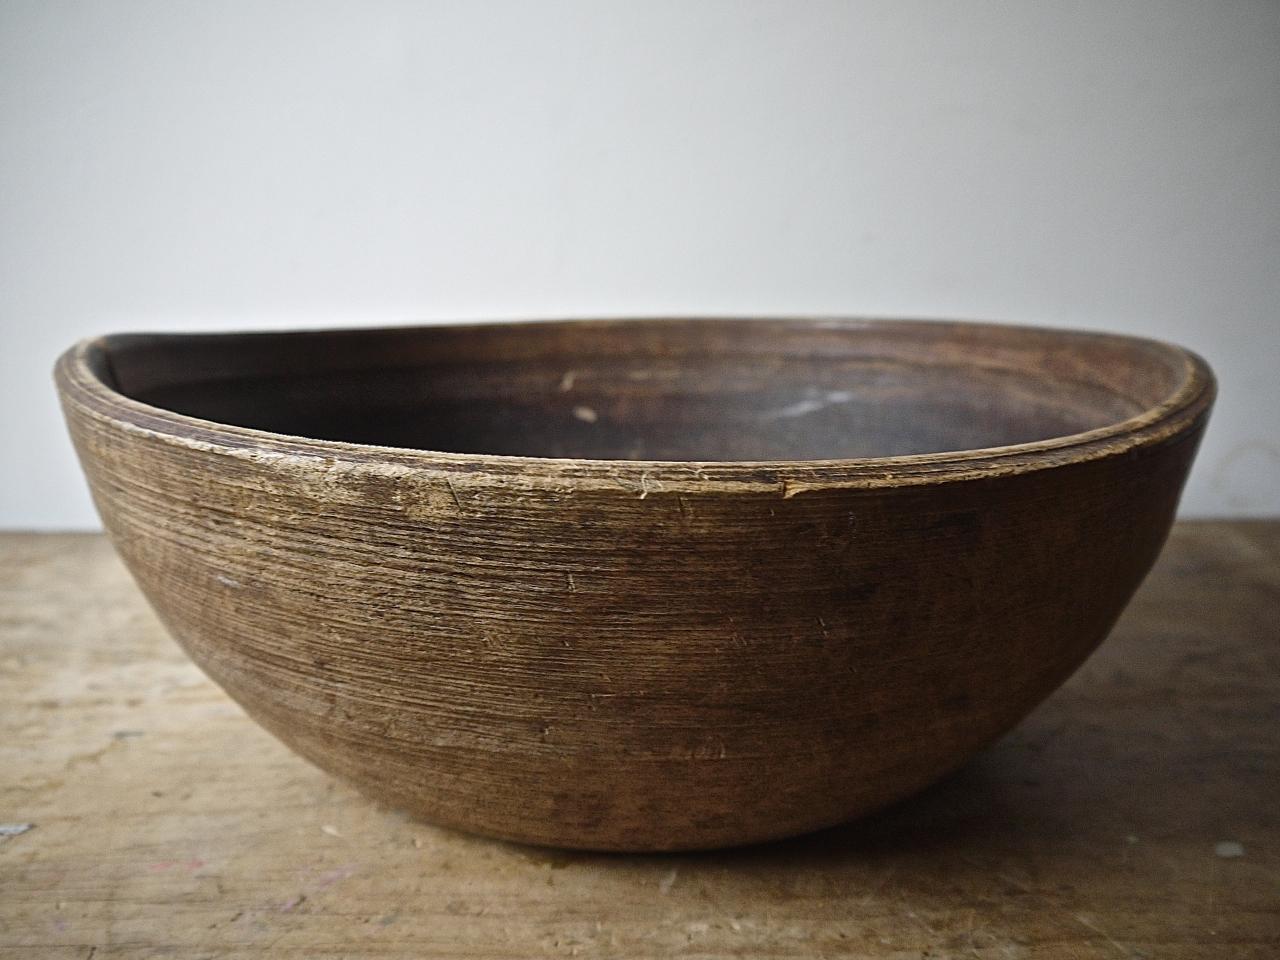 19th century Norwegian carved wooden bowl has a lovely worn and used feel and look.